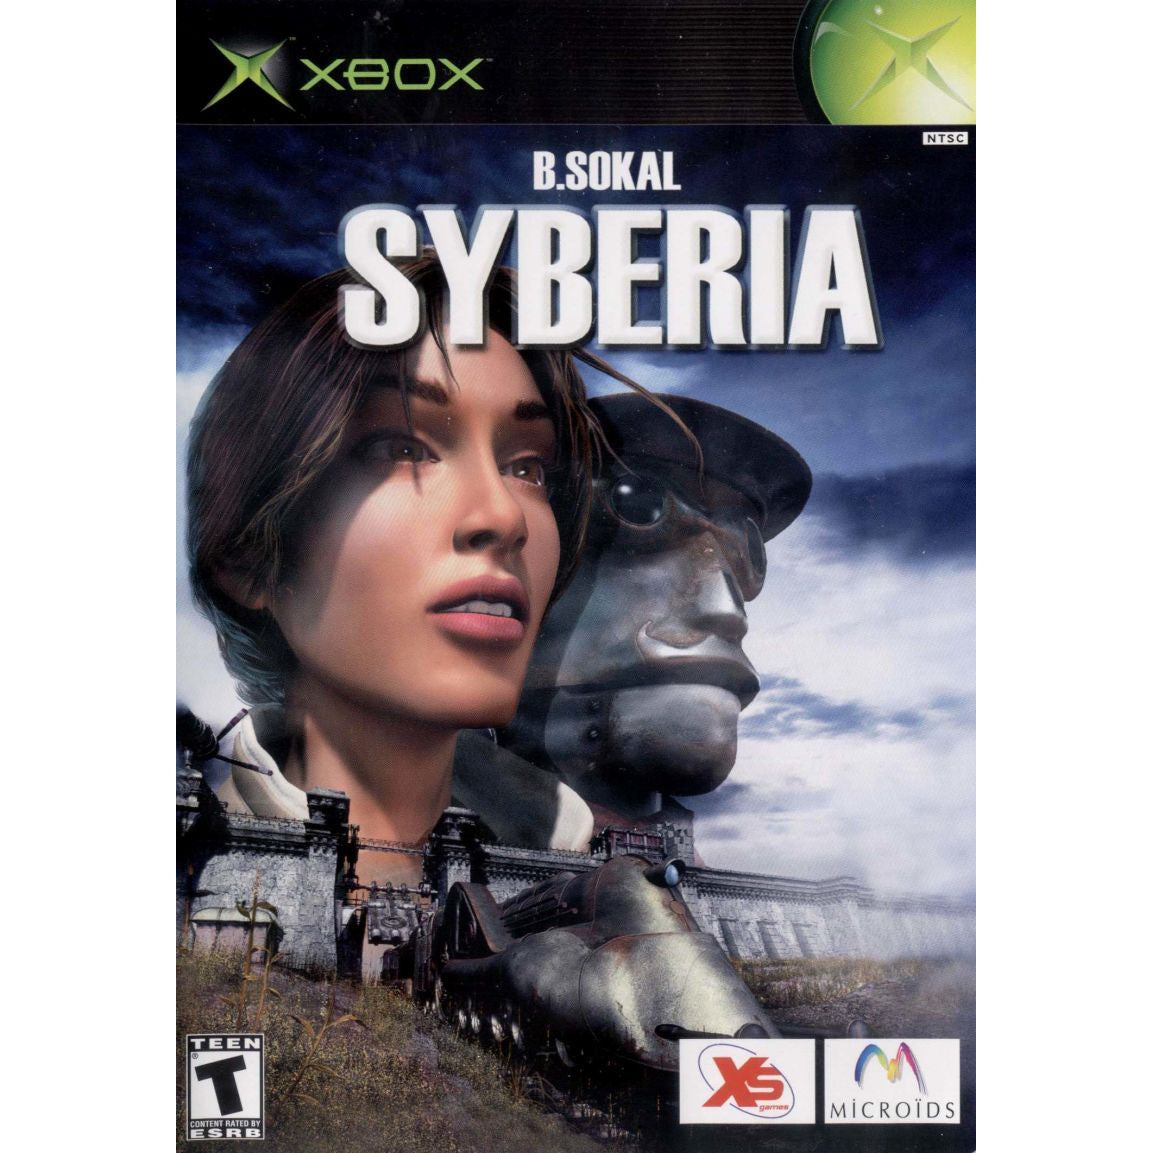 Syberia - Microsoft Xbox Game Complete - YourGamingShop.com - Buy, Sell, Trade Video Games Online. 120 Day Warranty. Satisfaction Guaranteed.